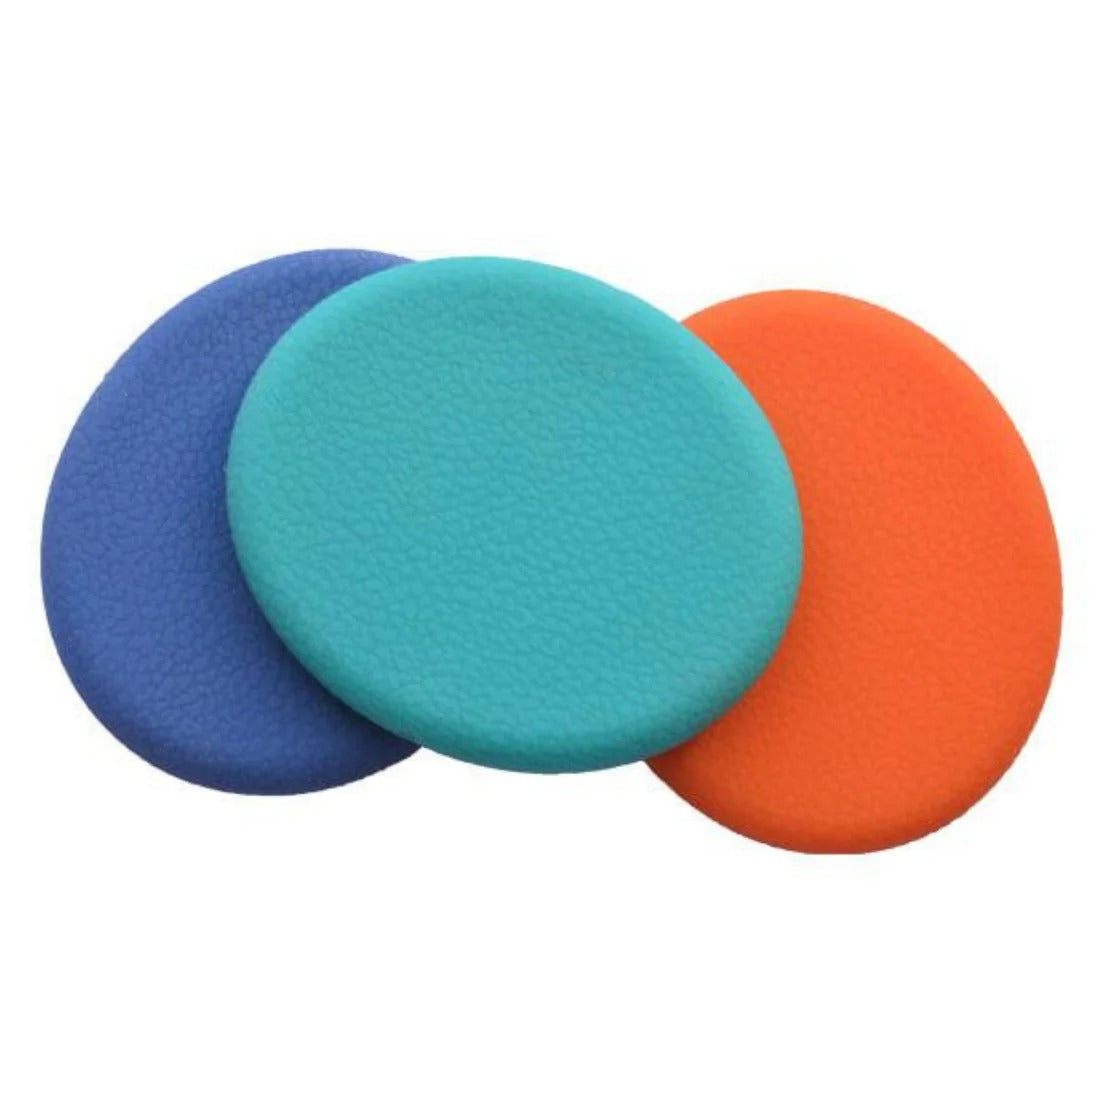 Pocket Sized Sensory Chew Stim stones, Bright and adaptable the worry stones are multifunctional. The Sensory Chew Stim stones provides calming sensory feedback to assist with your self-regulation. Portable and practical Pop them in your pocket Adored by tactile seekers and chewers alike Weight 0.08 kg Dimensions 3 × 12 × 12 cm, Pocket Sized Sensory Chew Stim stones,chewigem style chews,chewigem discount,chewigem coupon, 